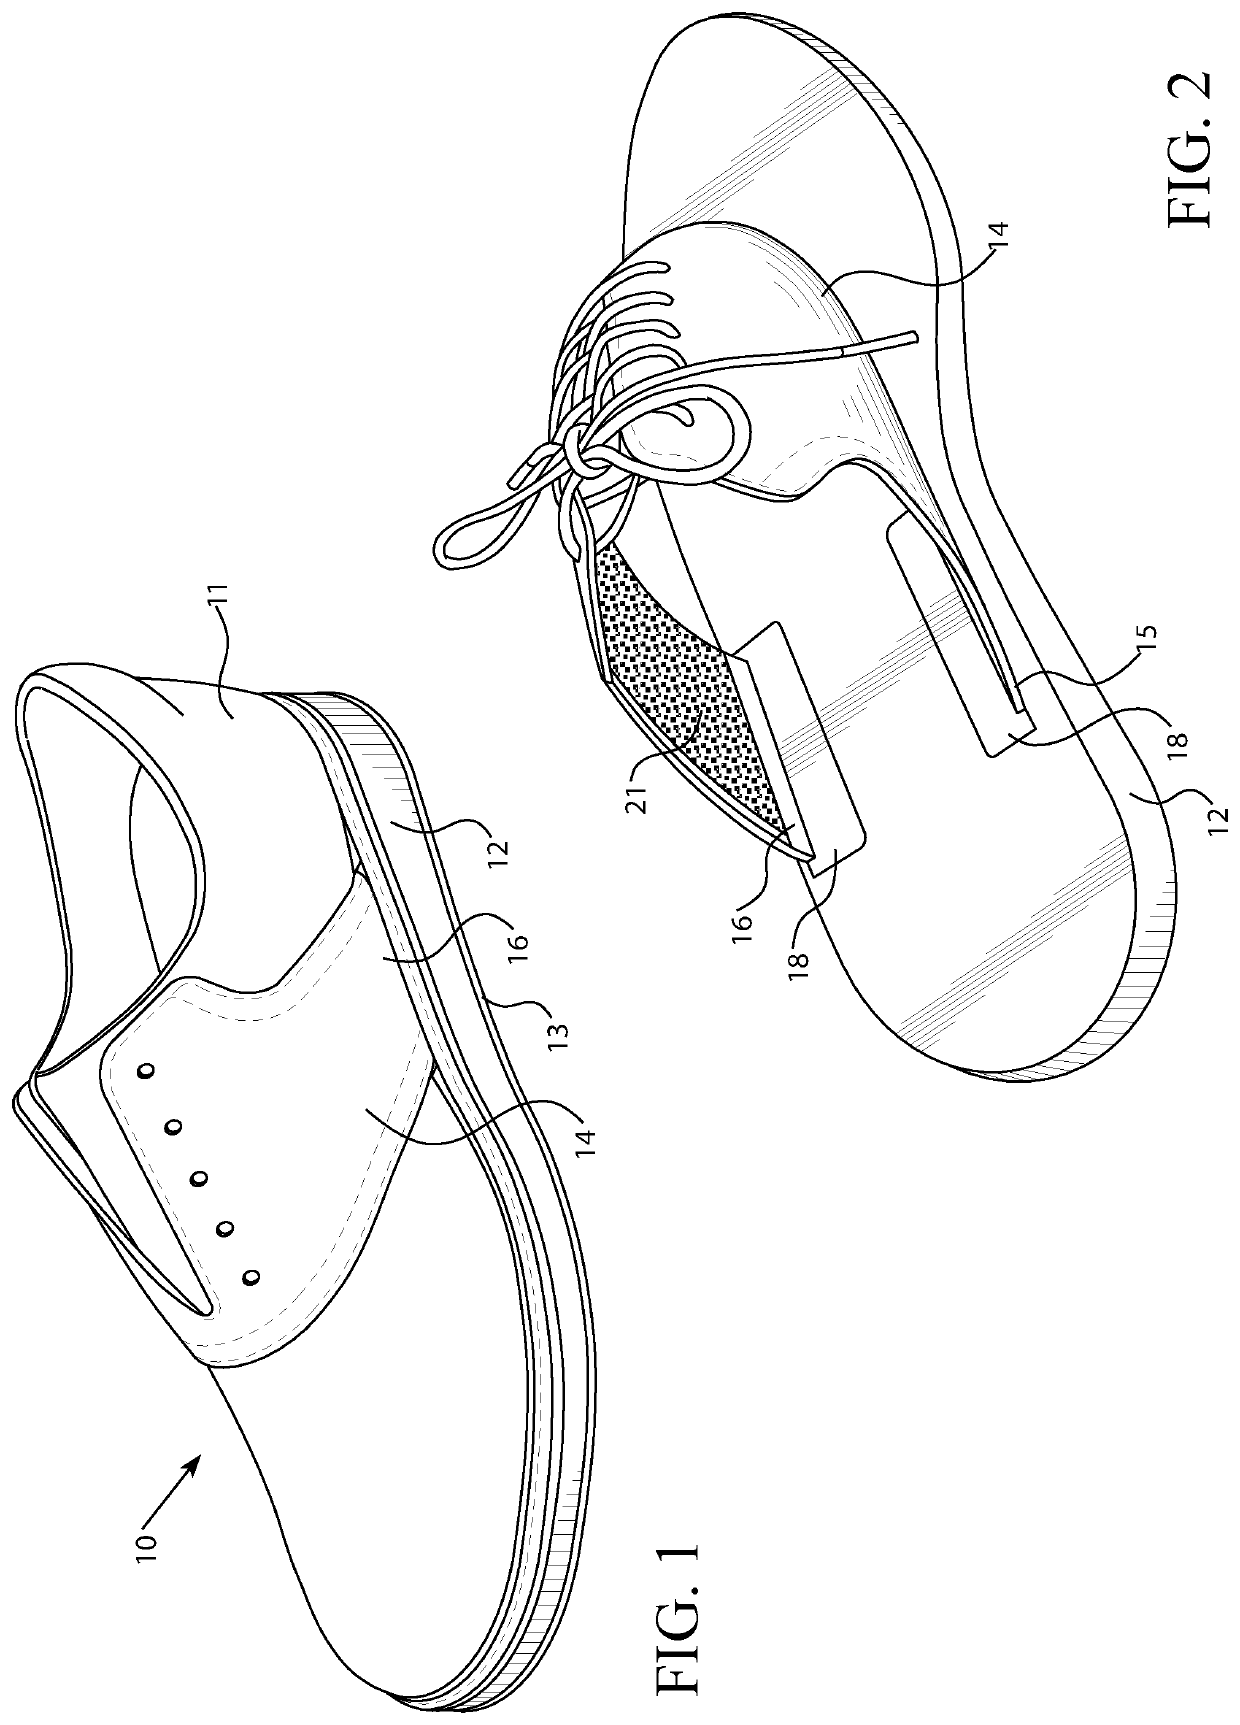 Footwear With One or More Removable and Interchangeable Panels